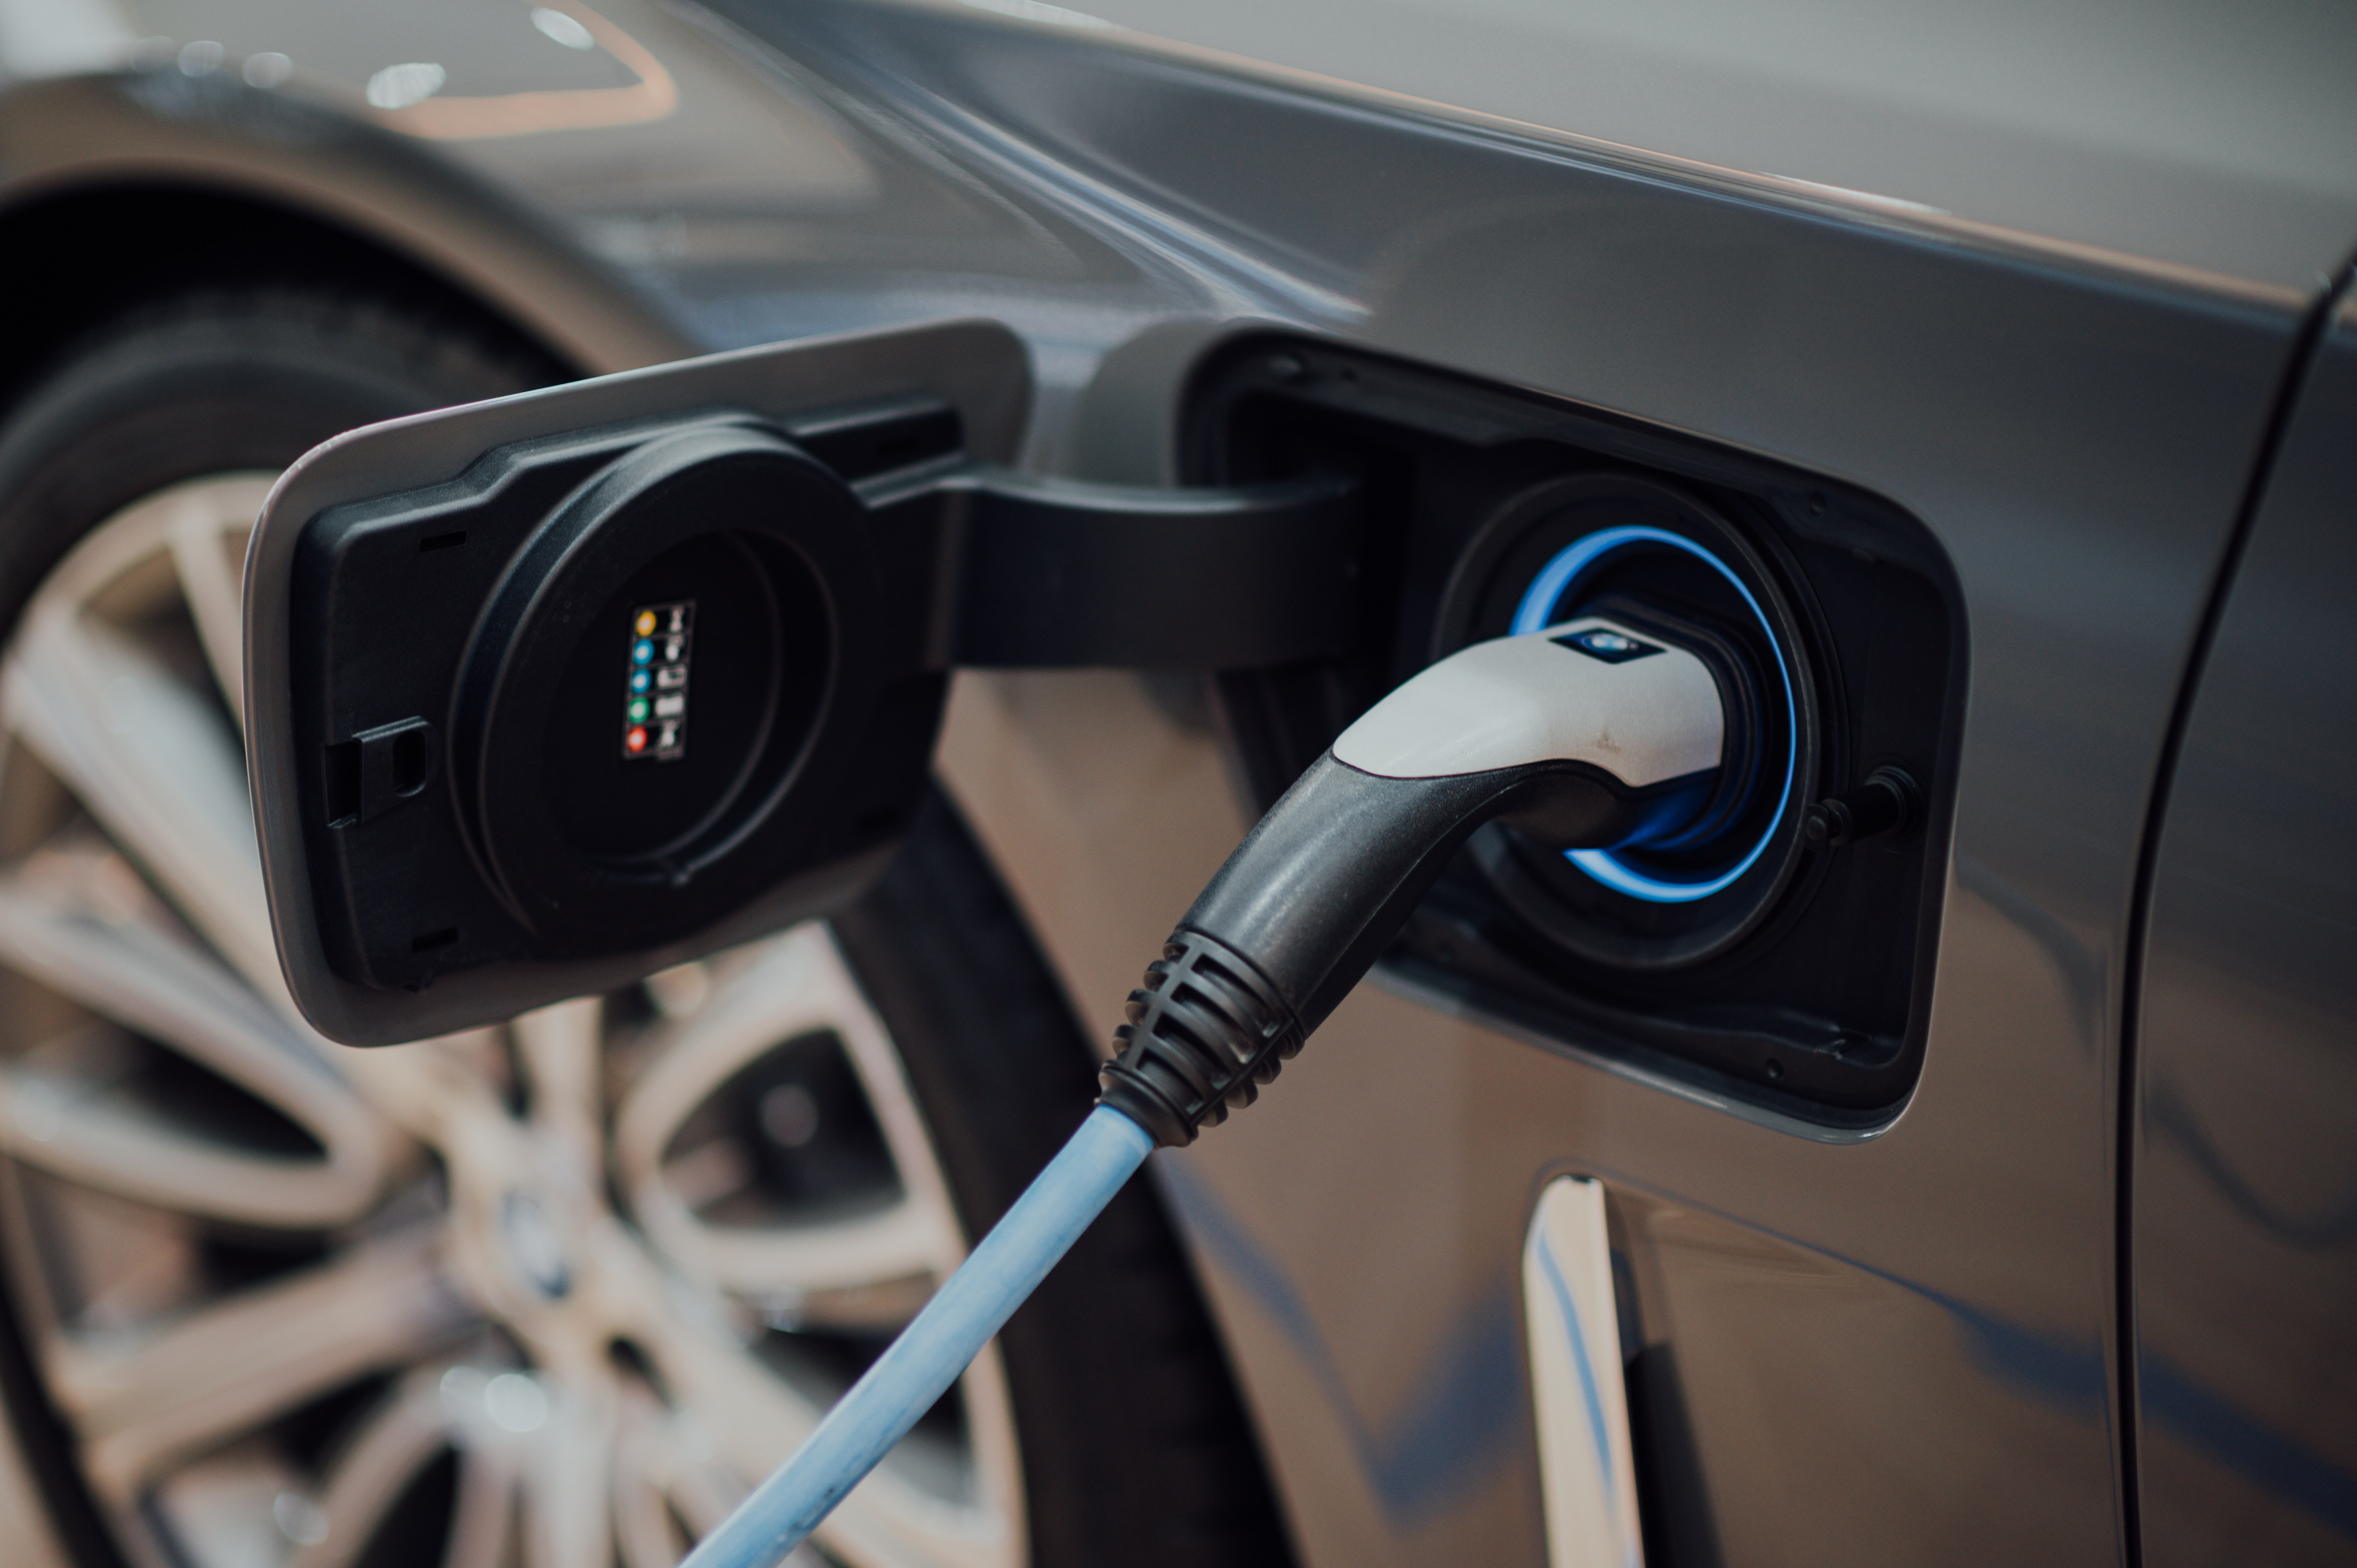 So, how much does it cost to charge an EV?